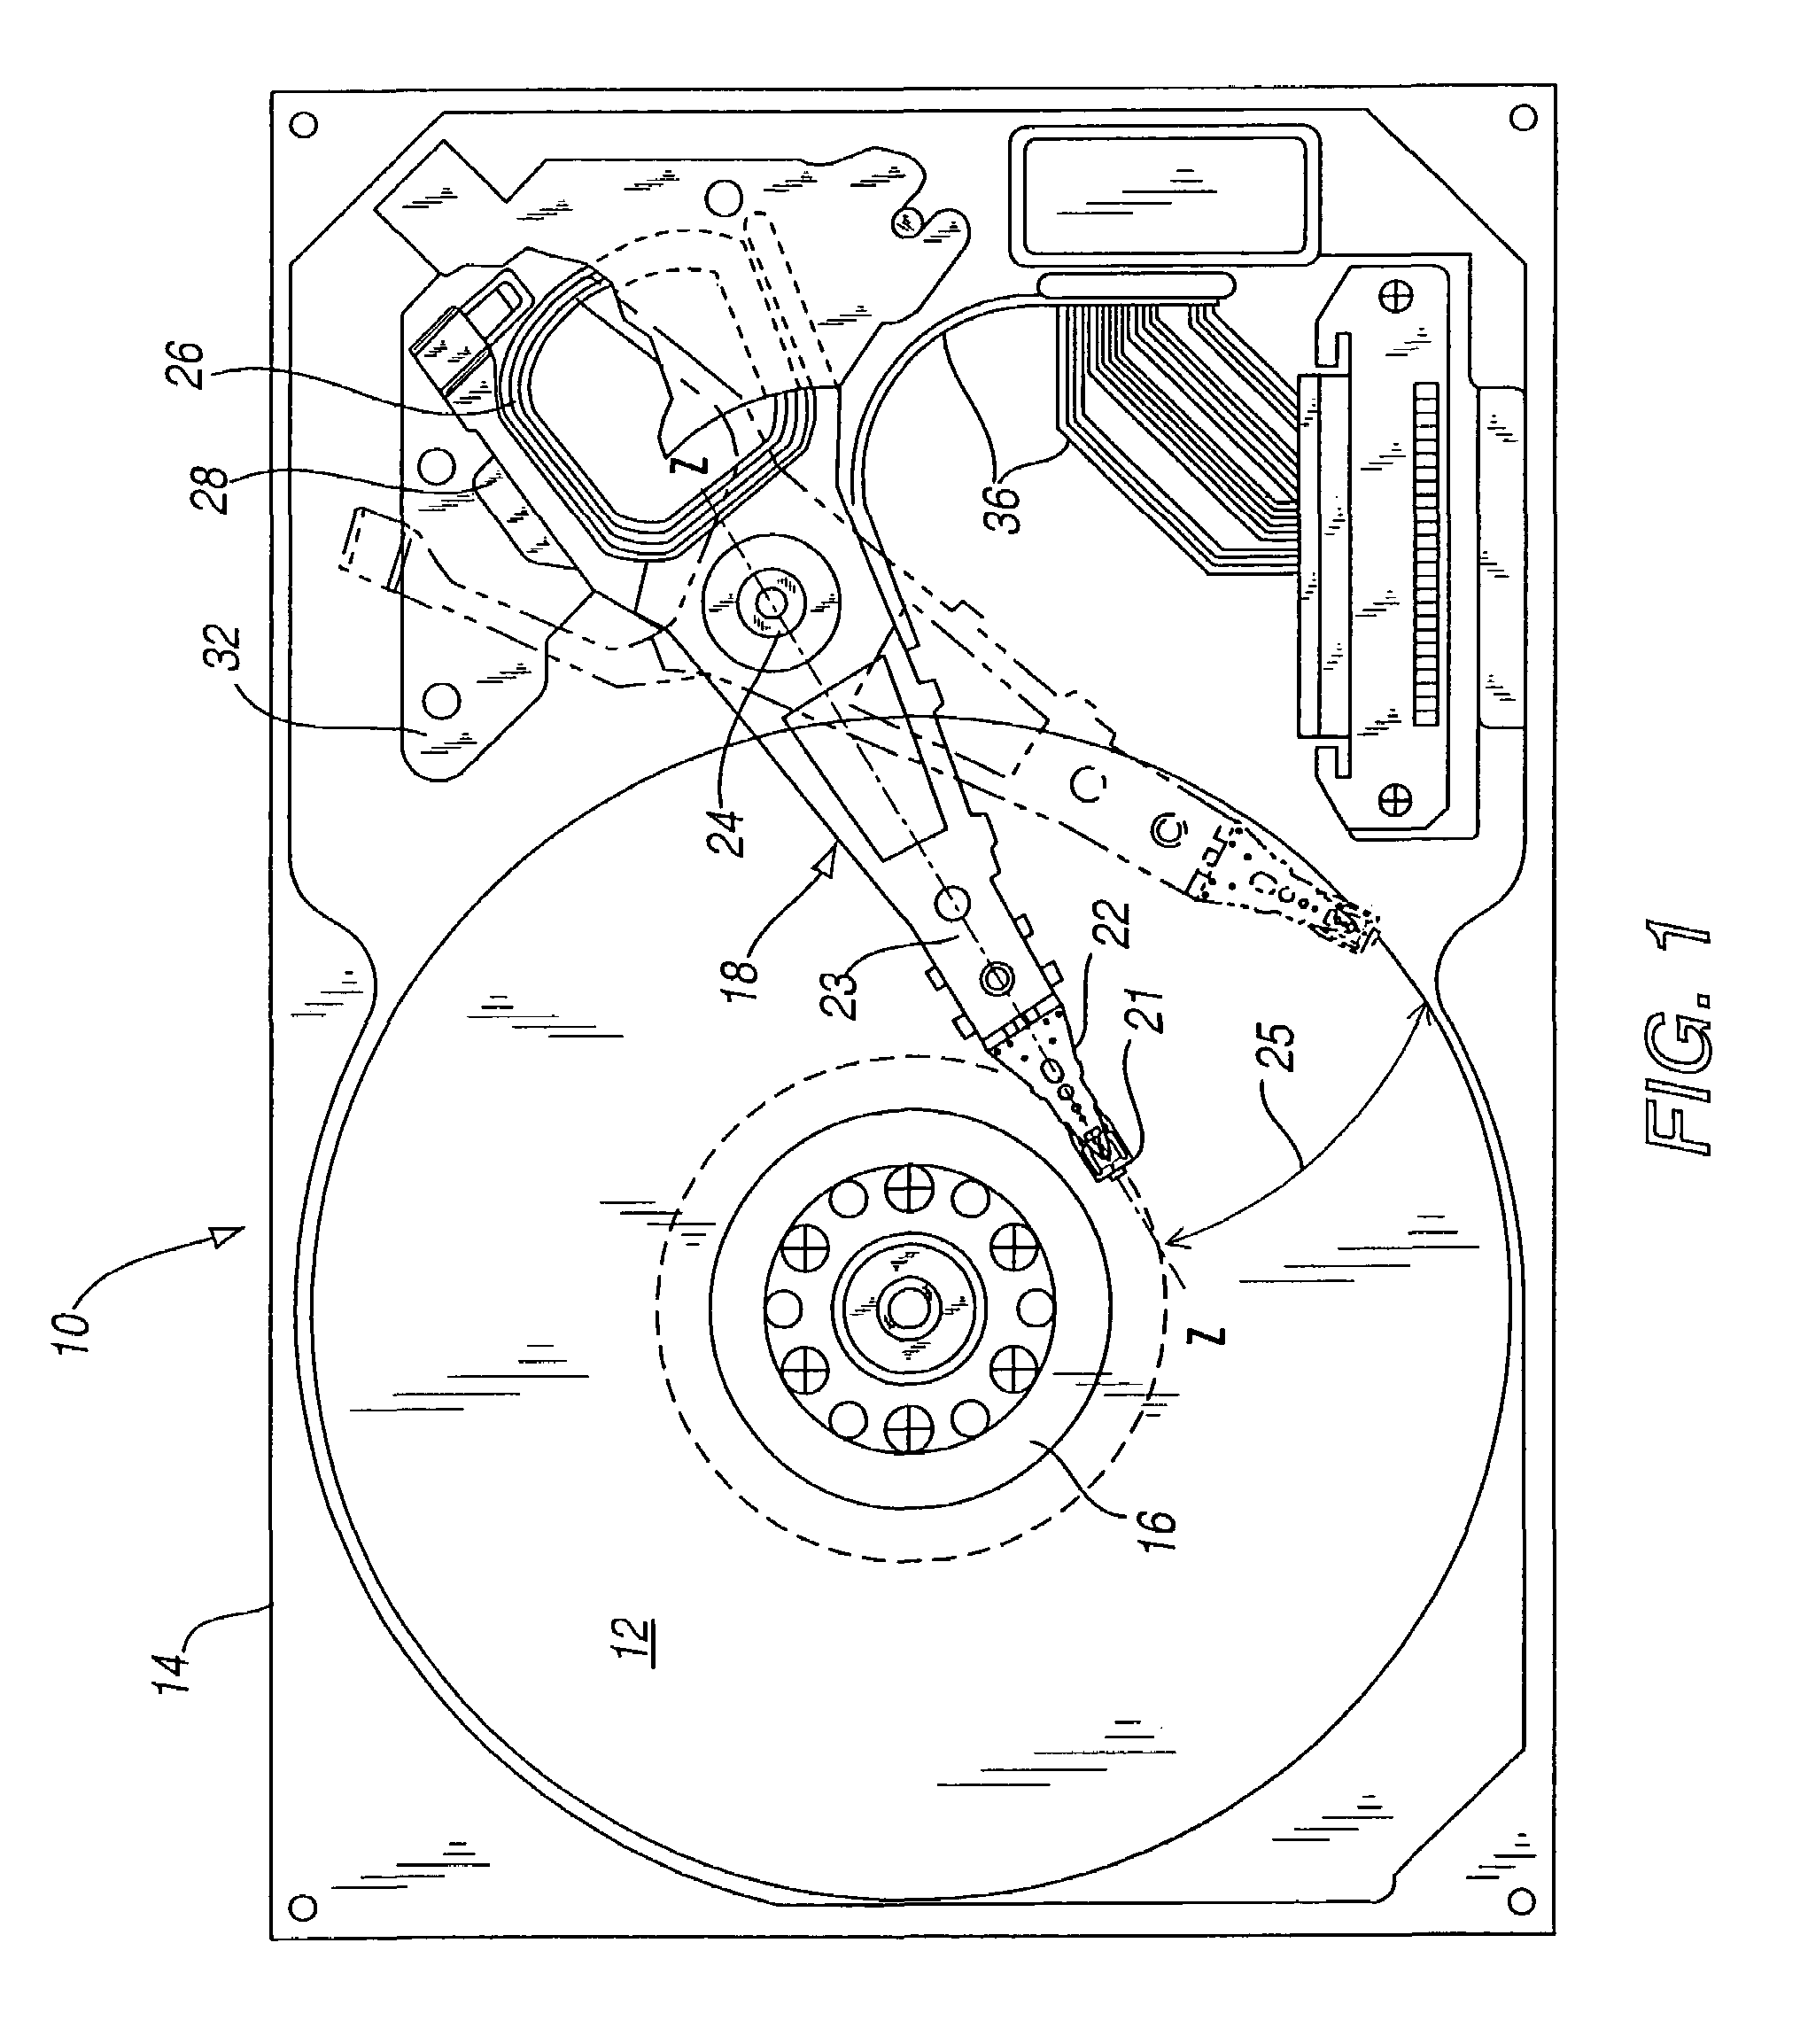 Micro-flexure suspension including piezoelectric elements for secondary actuation